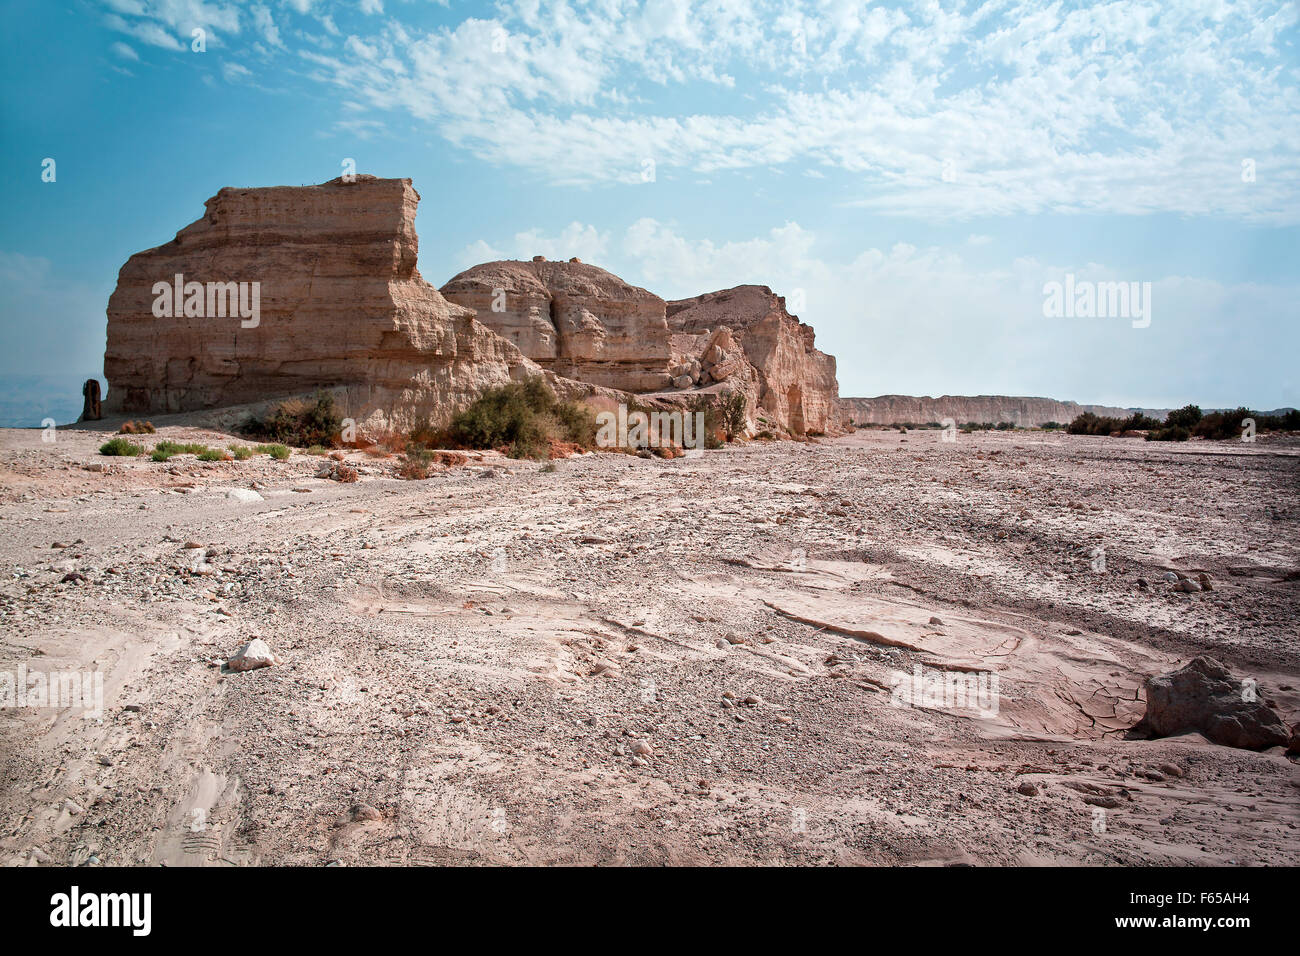 Israel, Sodom, near the southern part of the Dead Sea, Eroded rock Stock Photo